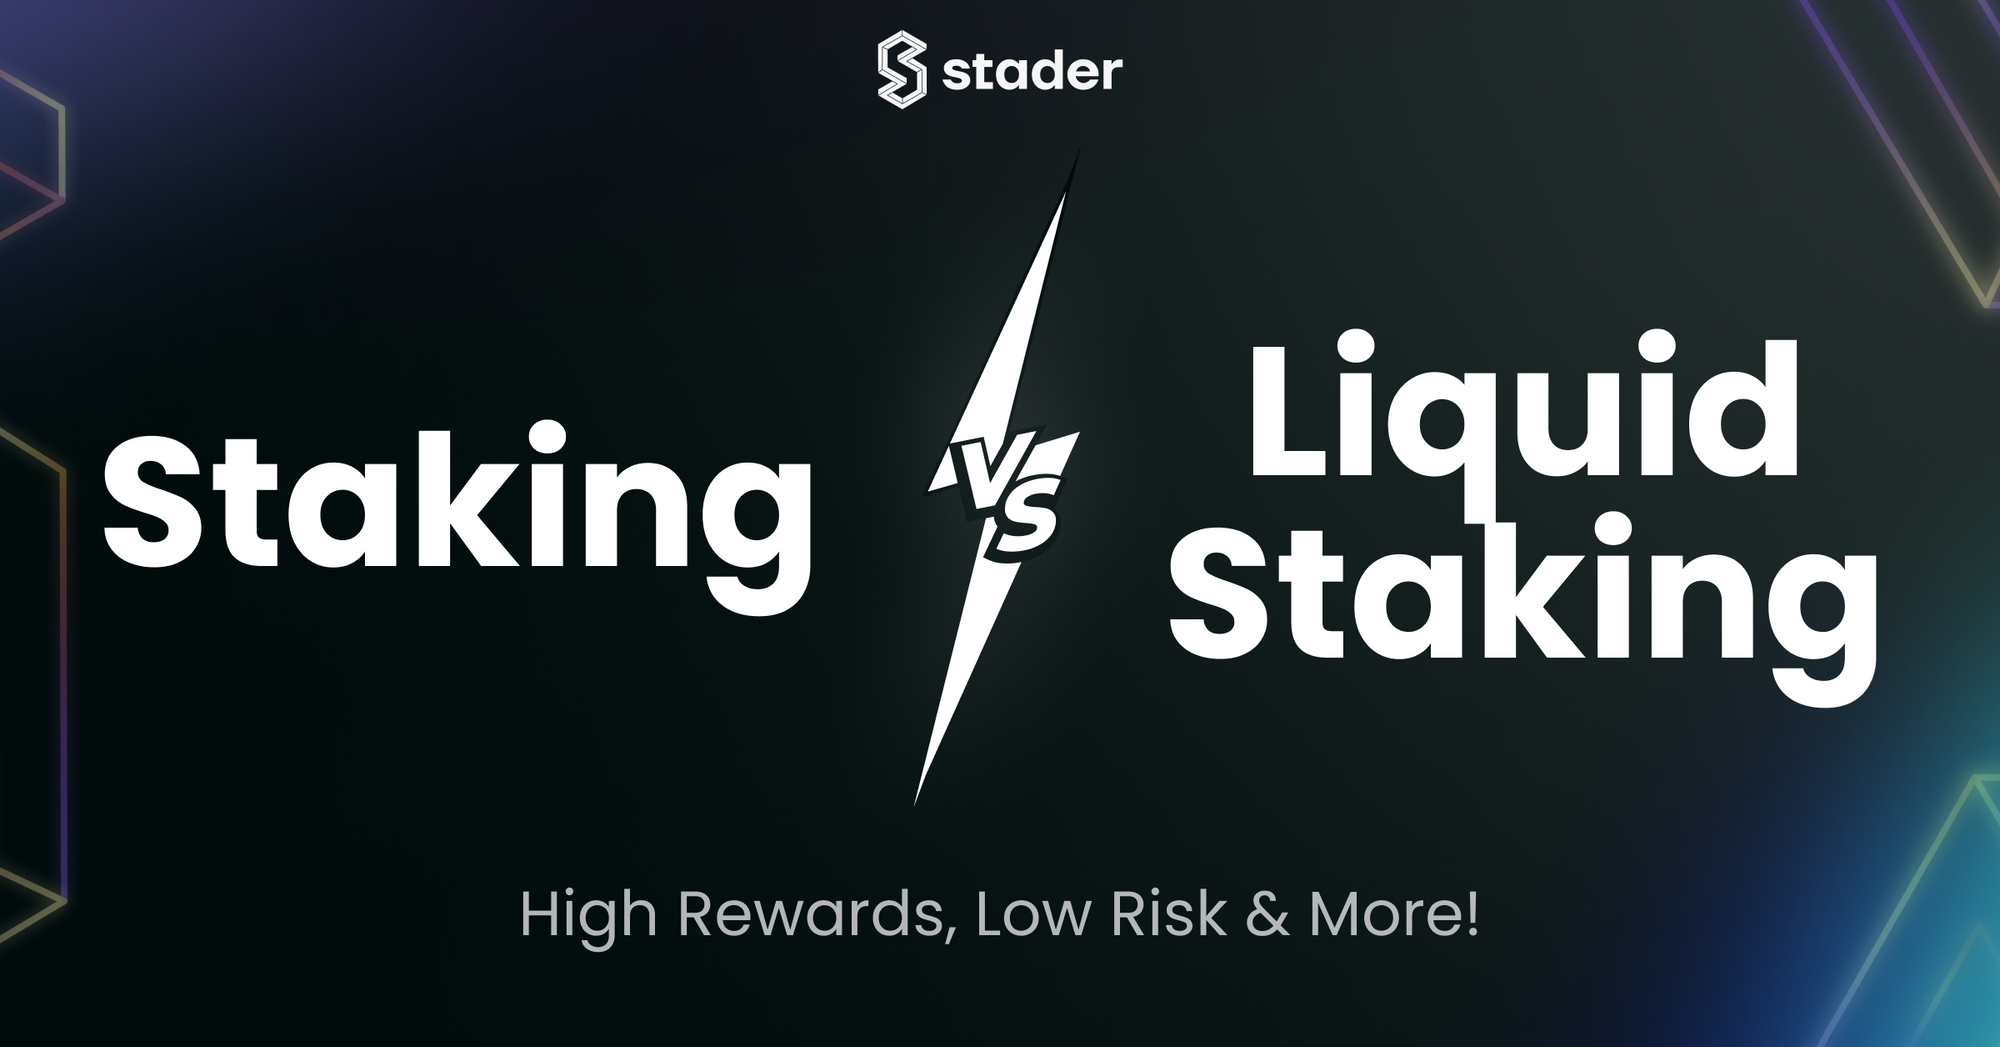 Staking vs Liquid Staking: High Rewards, Low Risk & More!